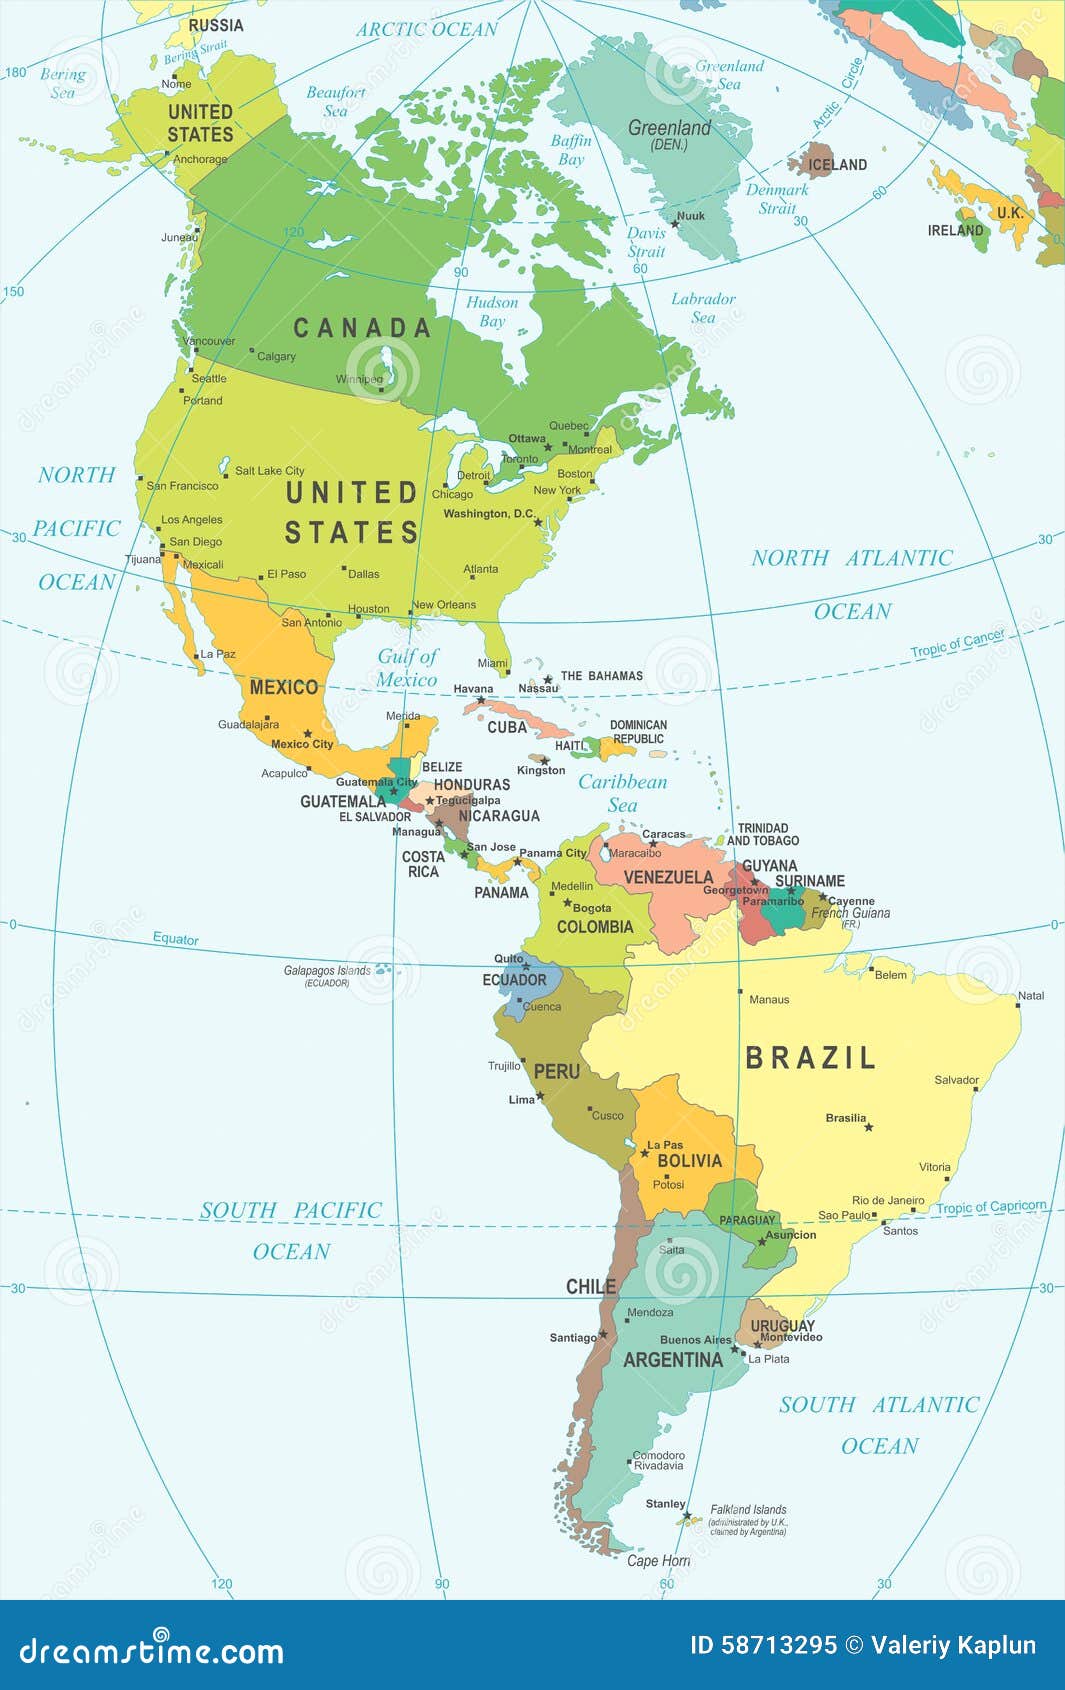 north-and-south-america-map-illustration-stock-illustration